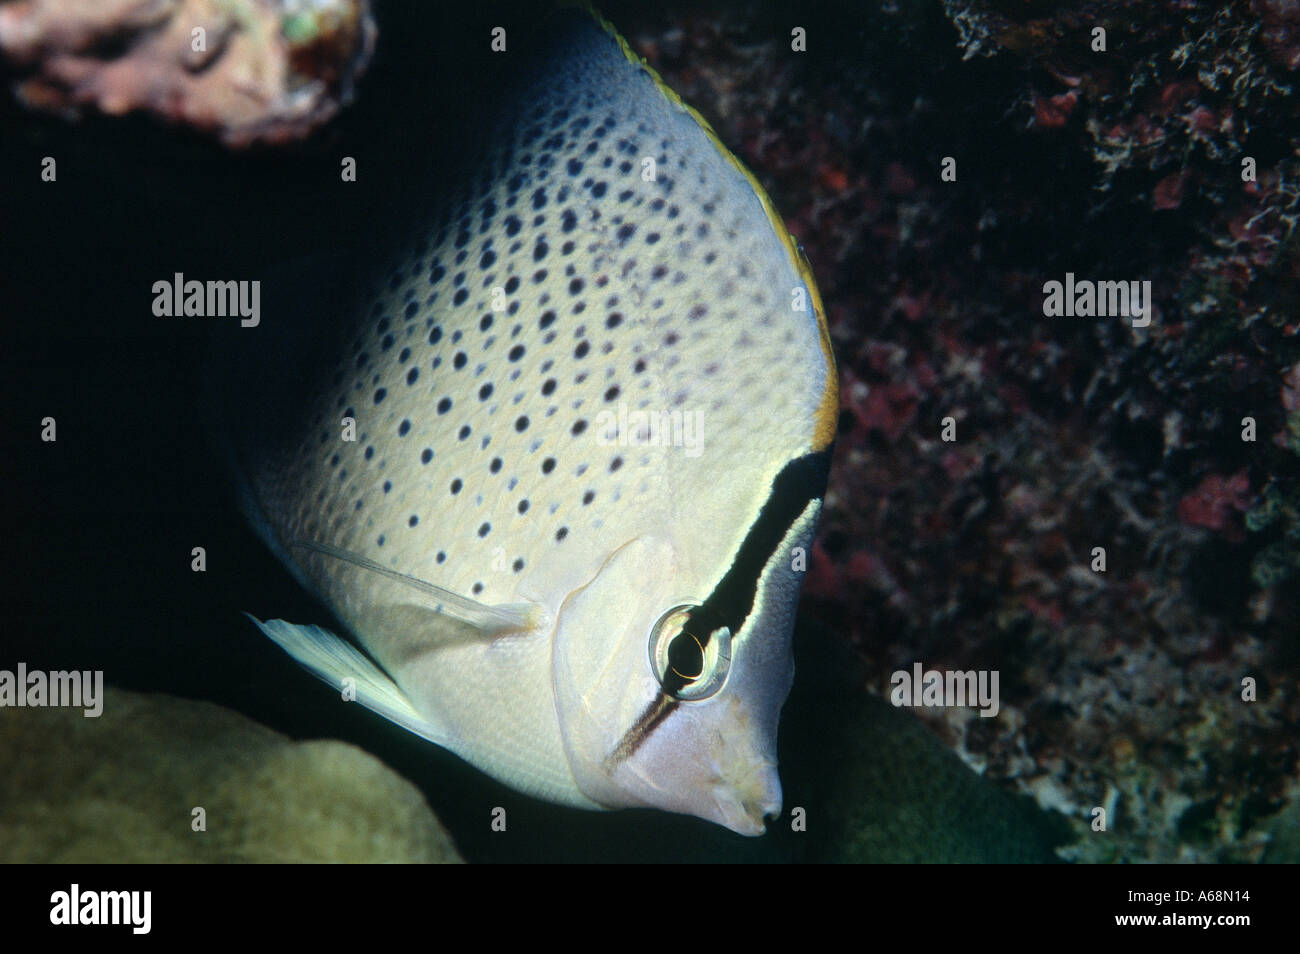 close up of head of butterflyfish Stock Photo